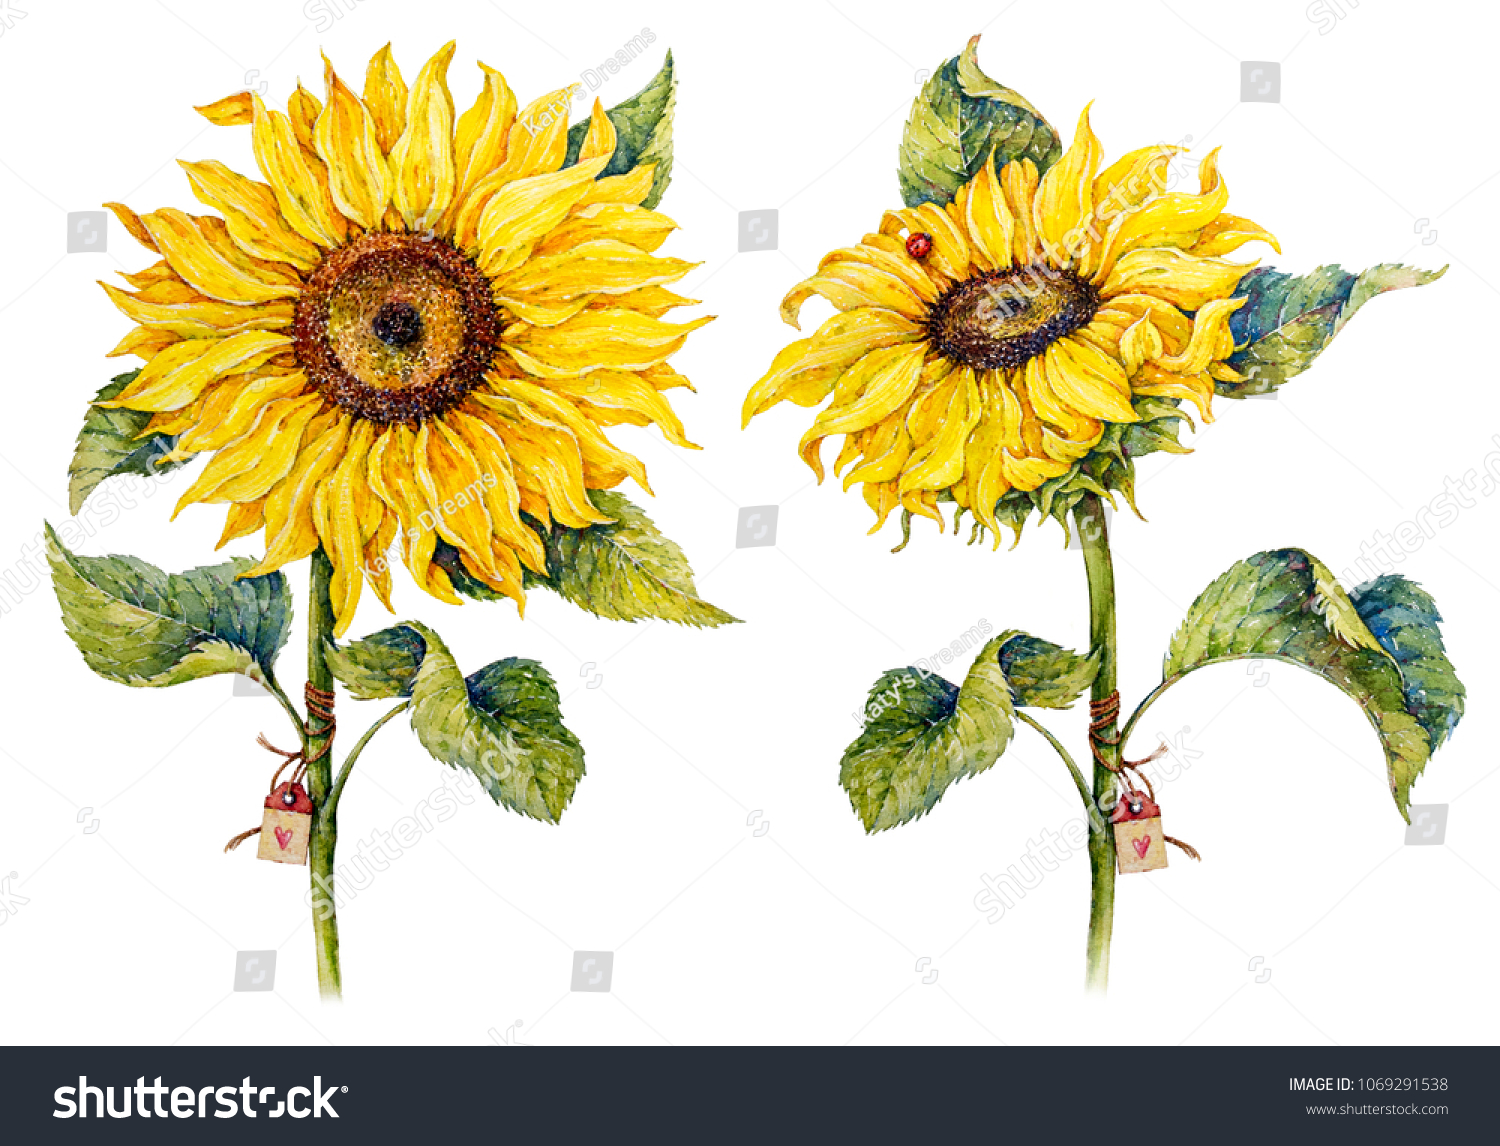 458,397 Colorful sunflowers Images, Stock Photos & Vectors | Shutterstock